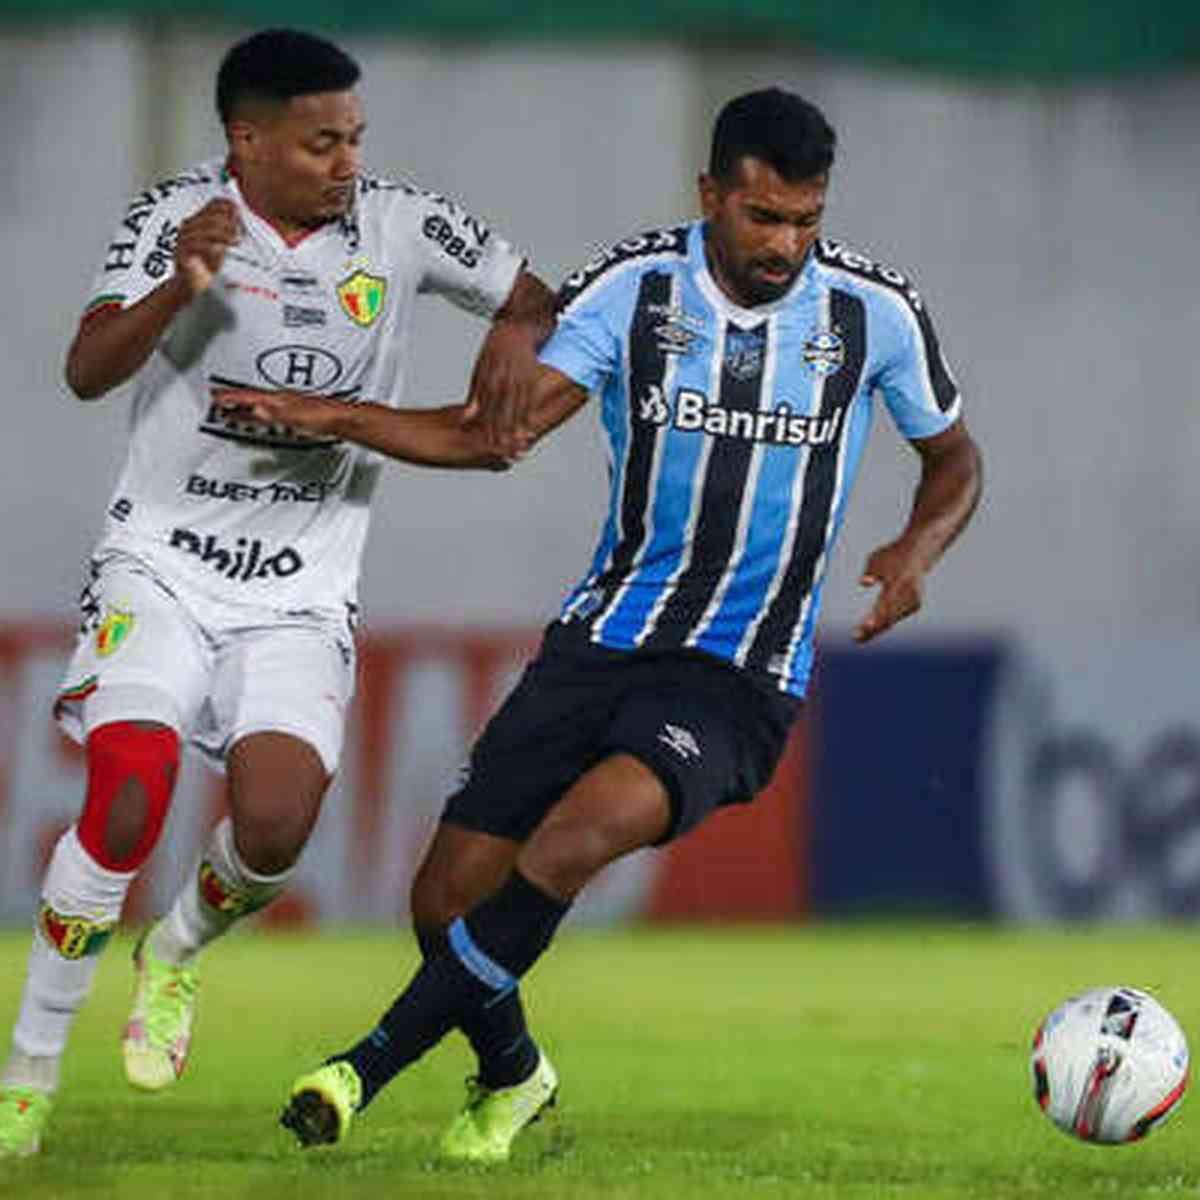 Ceará SC vs Tombense: A Clash of Skill and Determination